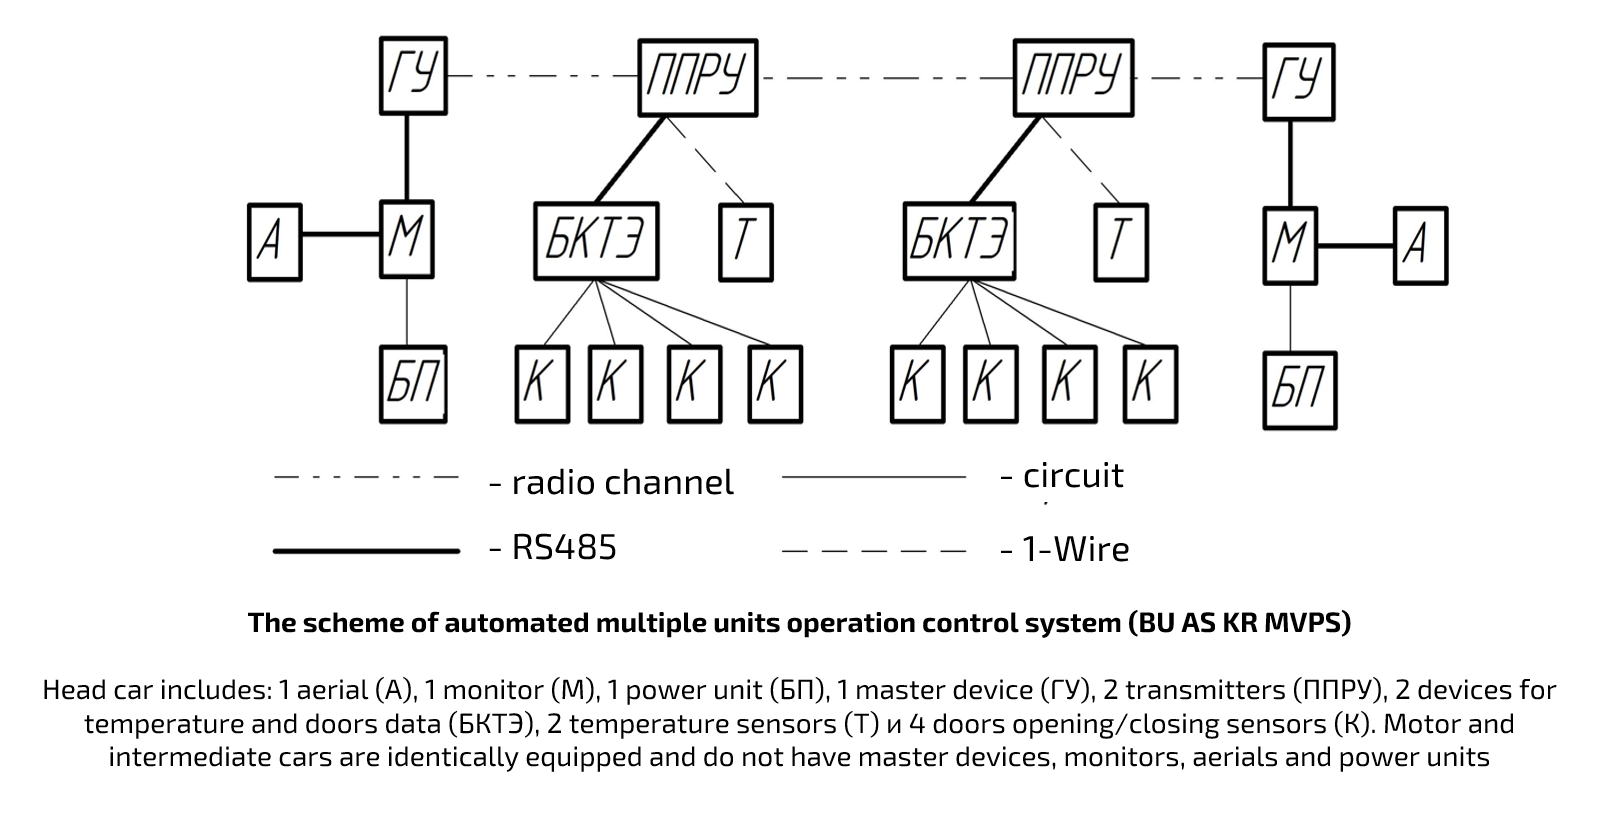 The automated multiple units operation control system by VNIIZHT